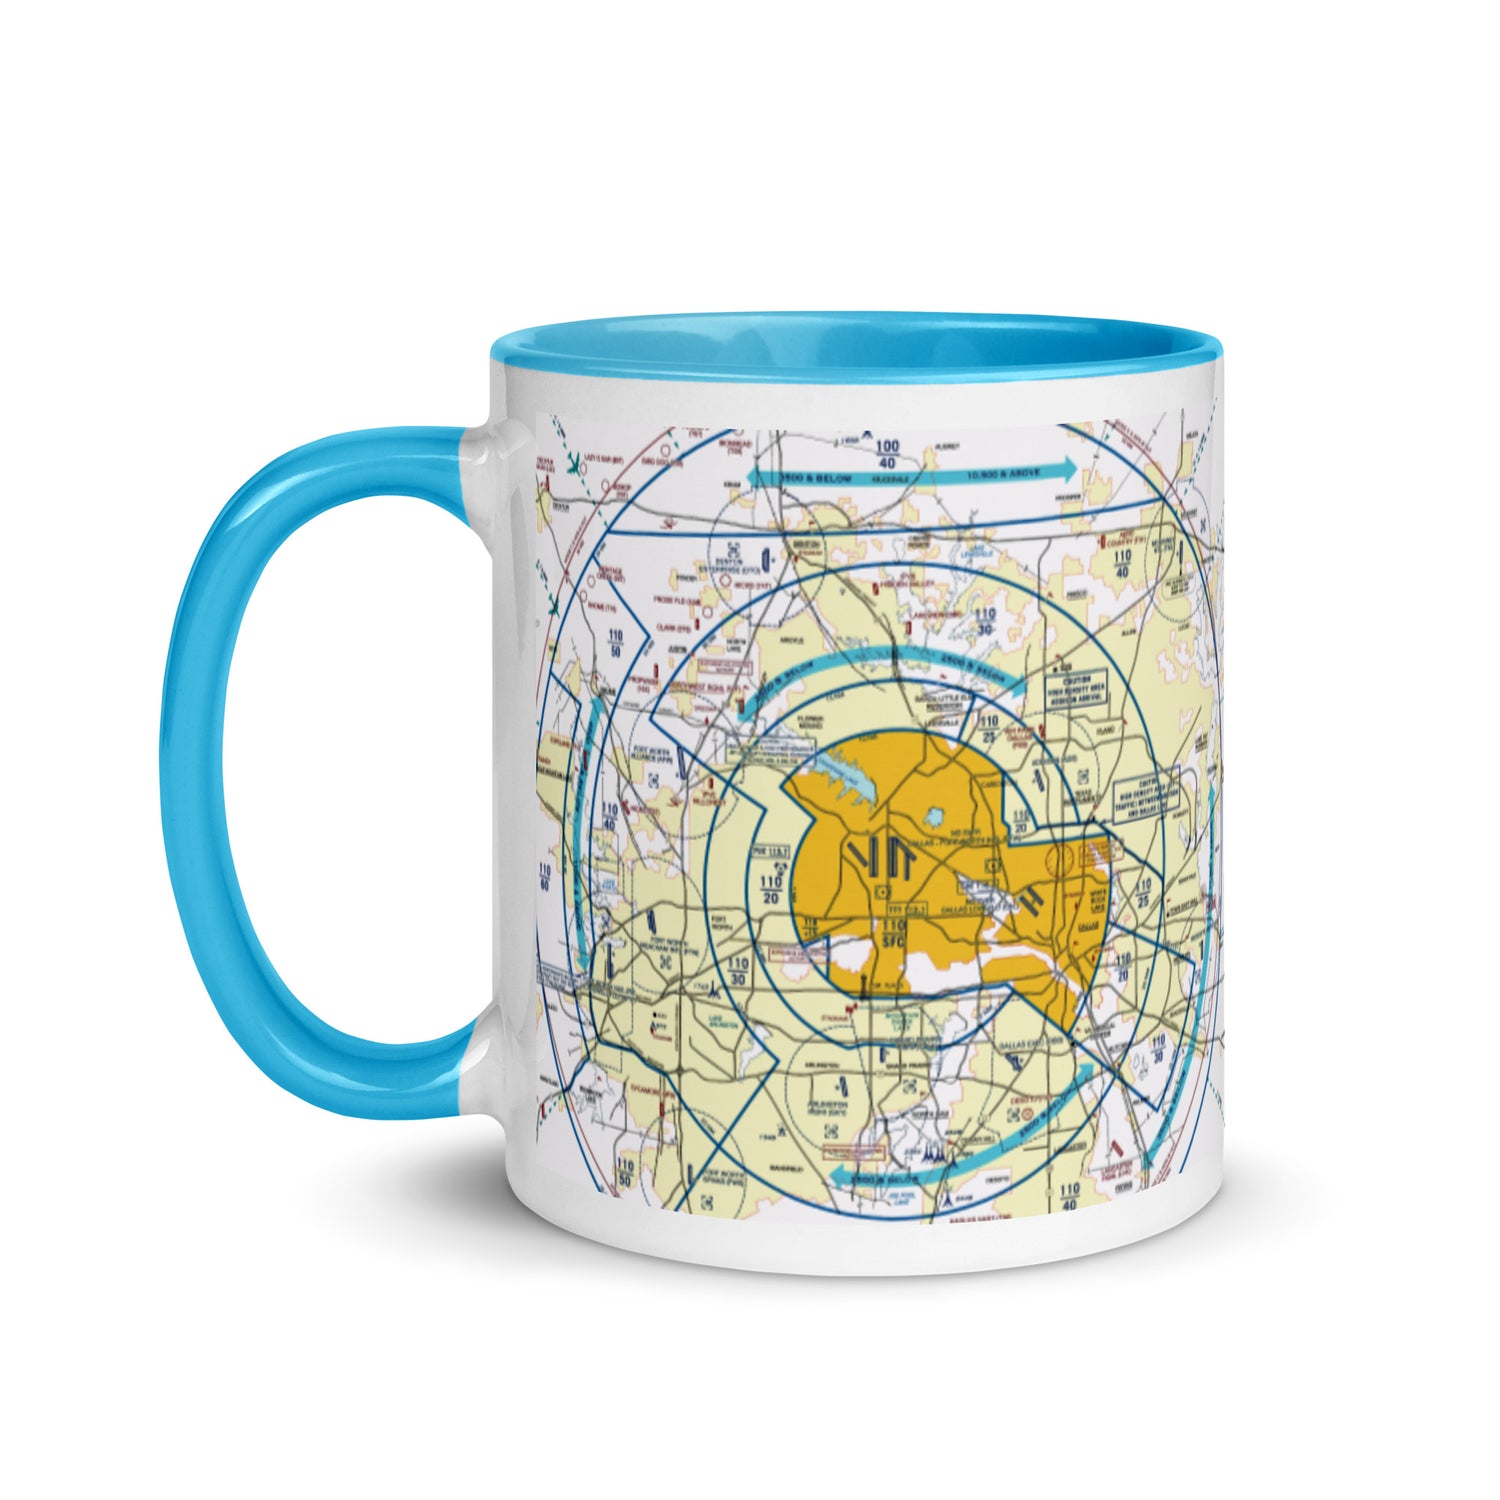 Dallas - Ft. Worth Flyway Chart 11 oz. mug with color inside